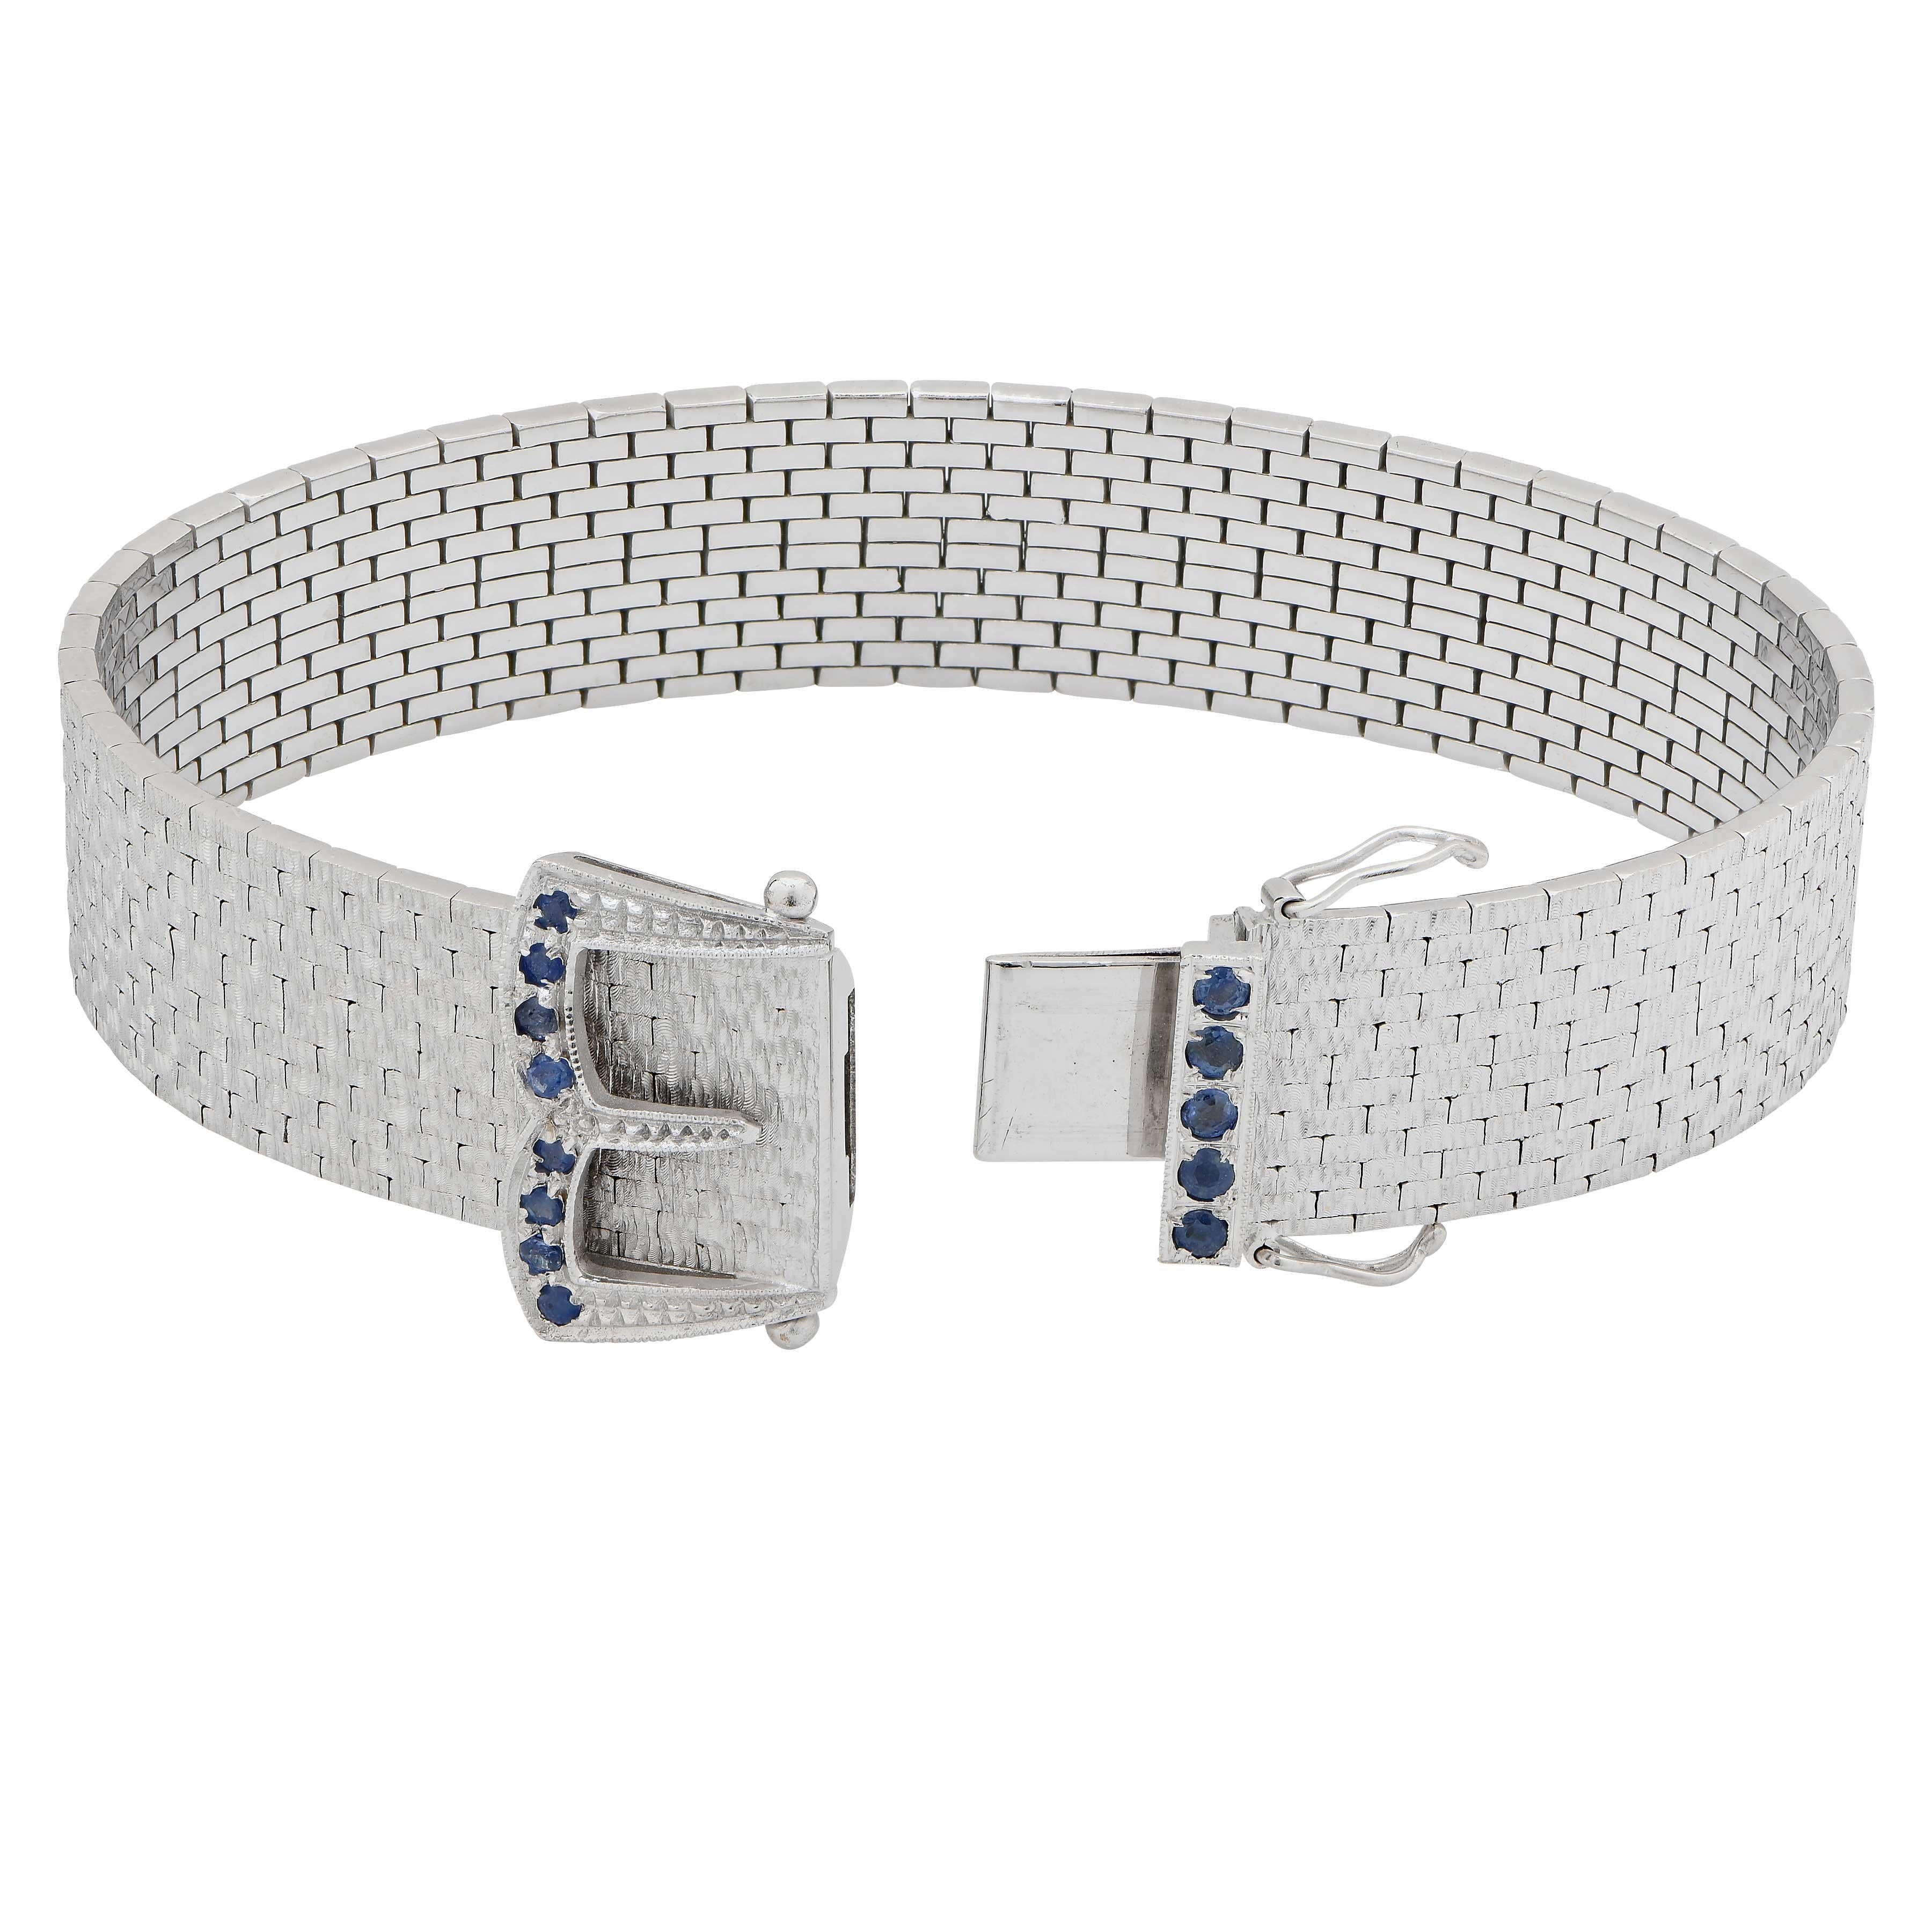 Mid Century Belt Bracelet with Sapphires in 18 Karat White Gold.
Metal 18 KT White Gold
Metal Weight 55.6 Grams
Length 7.5 inches